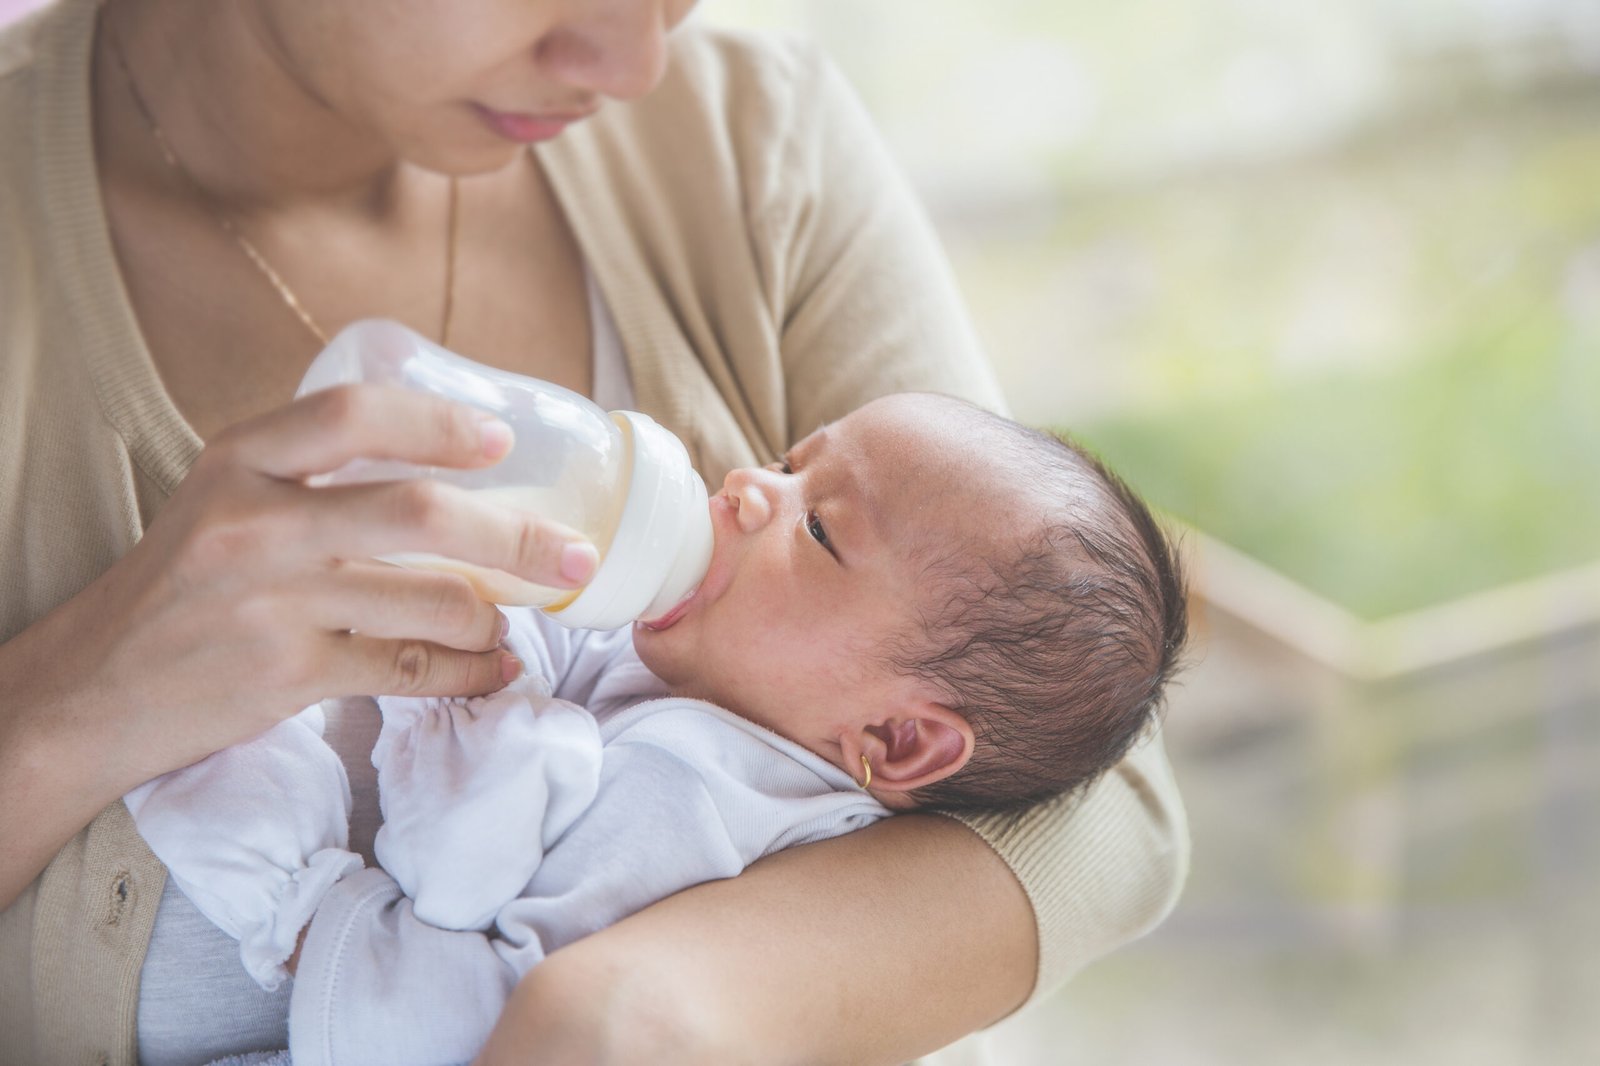 A comprehensive guide to safely prepare infant formula according to NHS and First Steps Nutrition advice